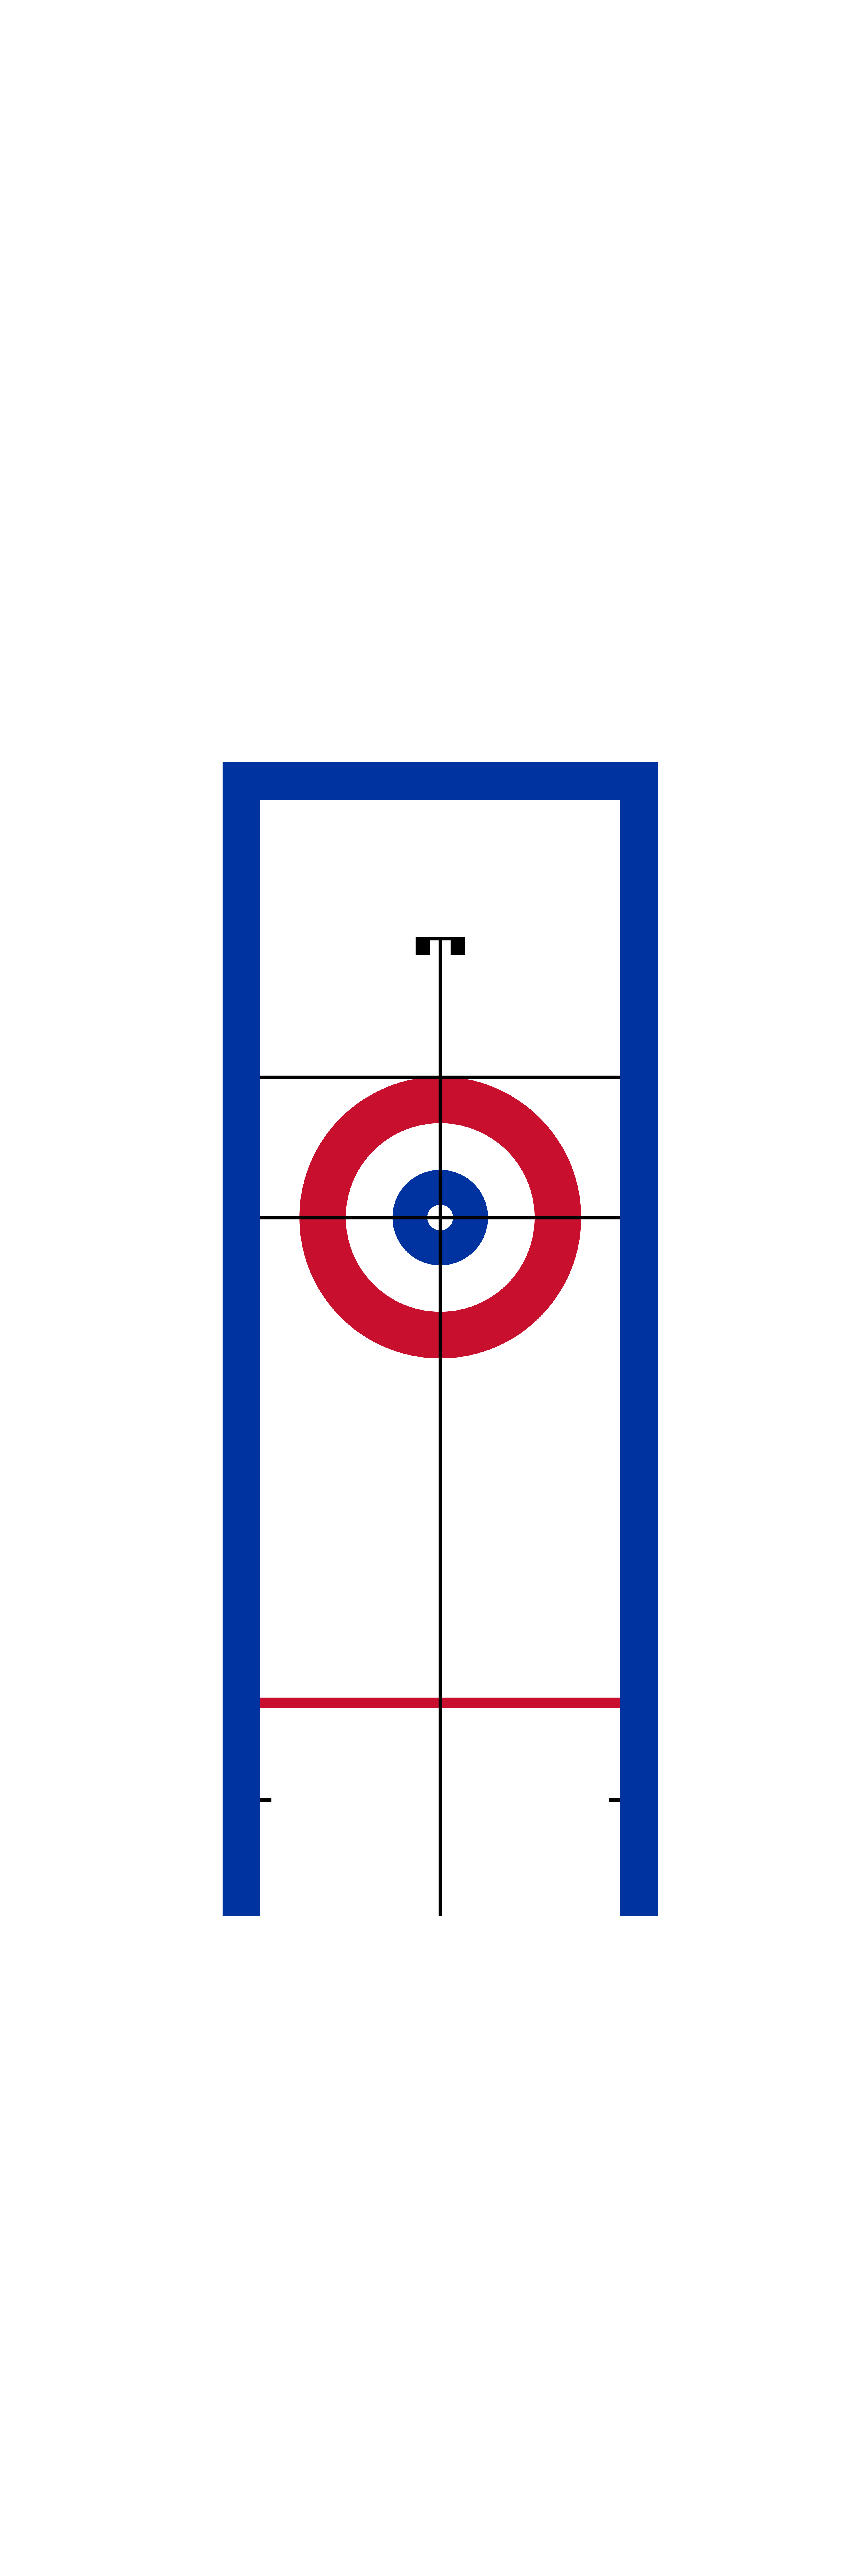 Curling house rendered from World Curling Federation sheet